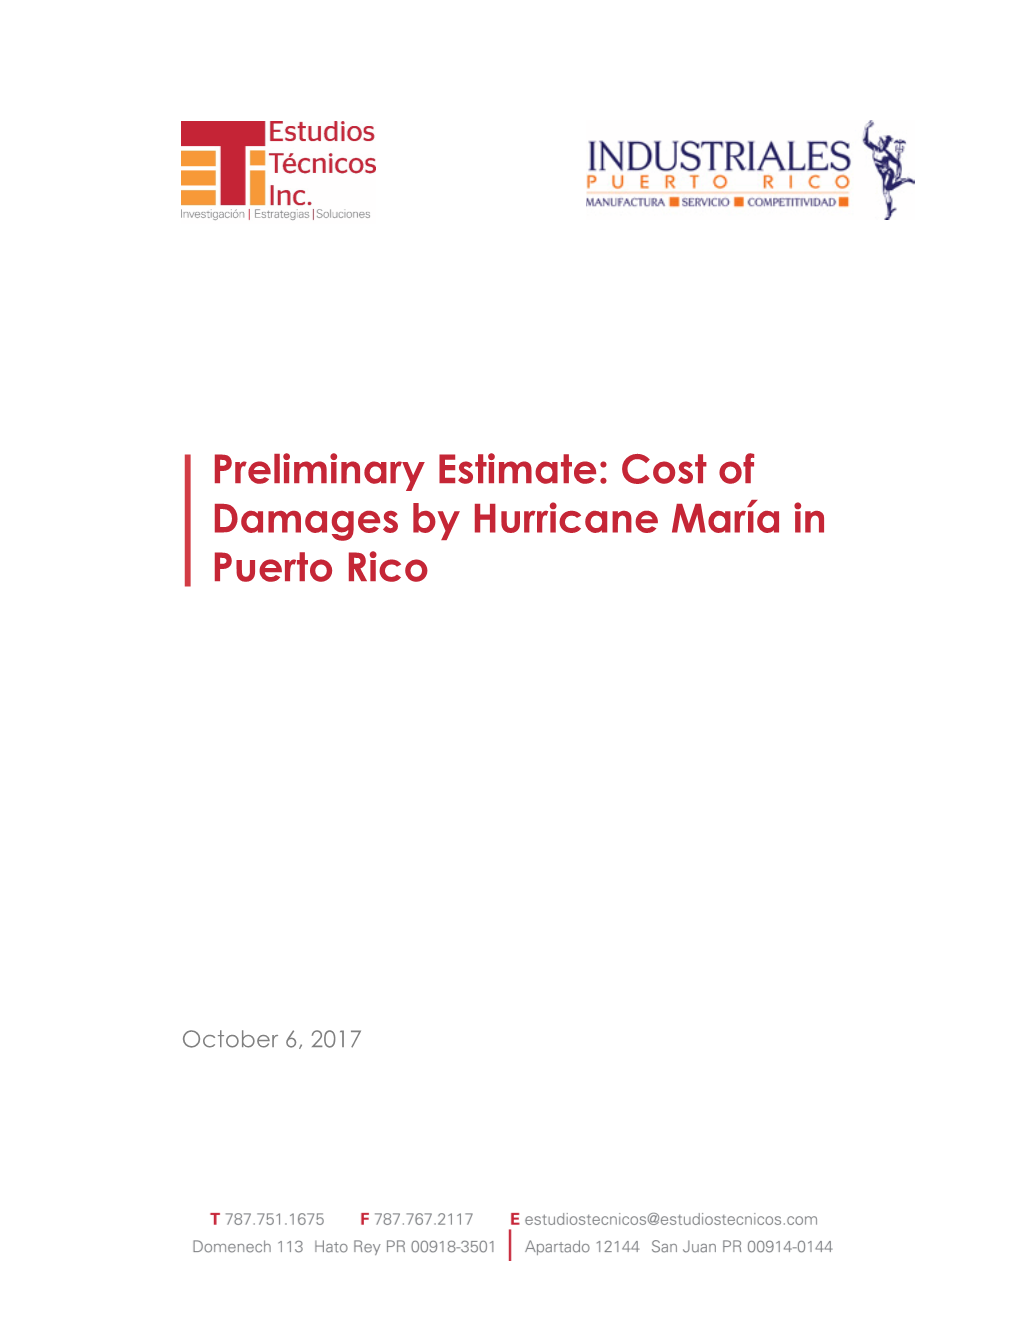 Preliminary Estimate: Cost of Damages by Hurricane María In